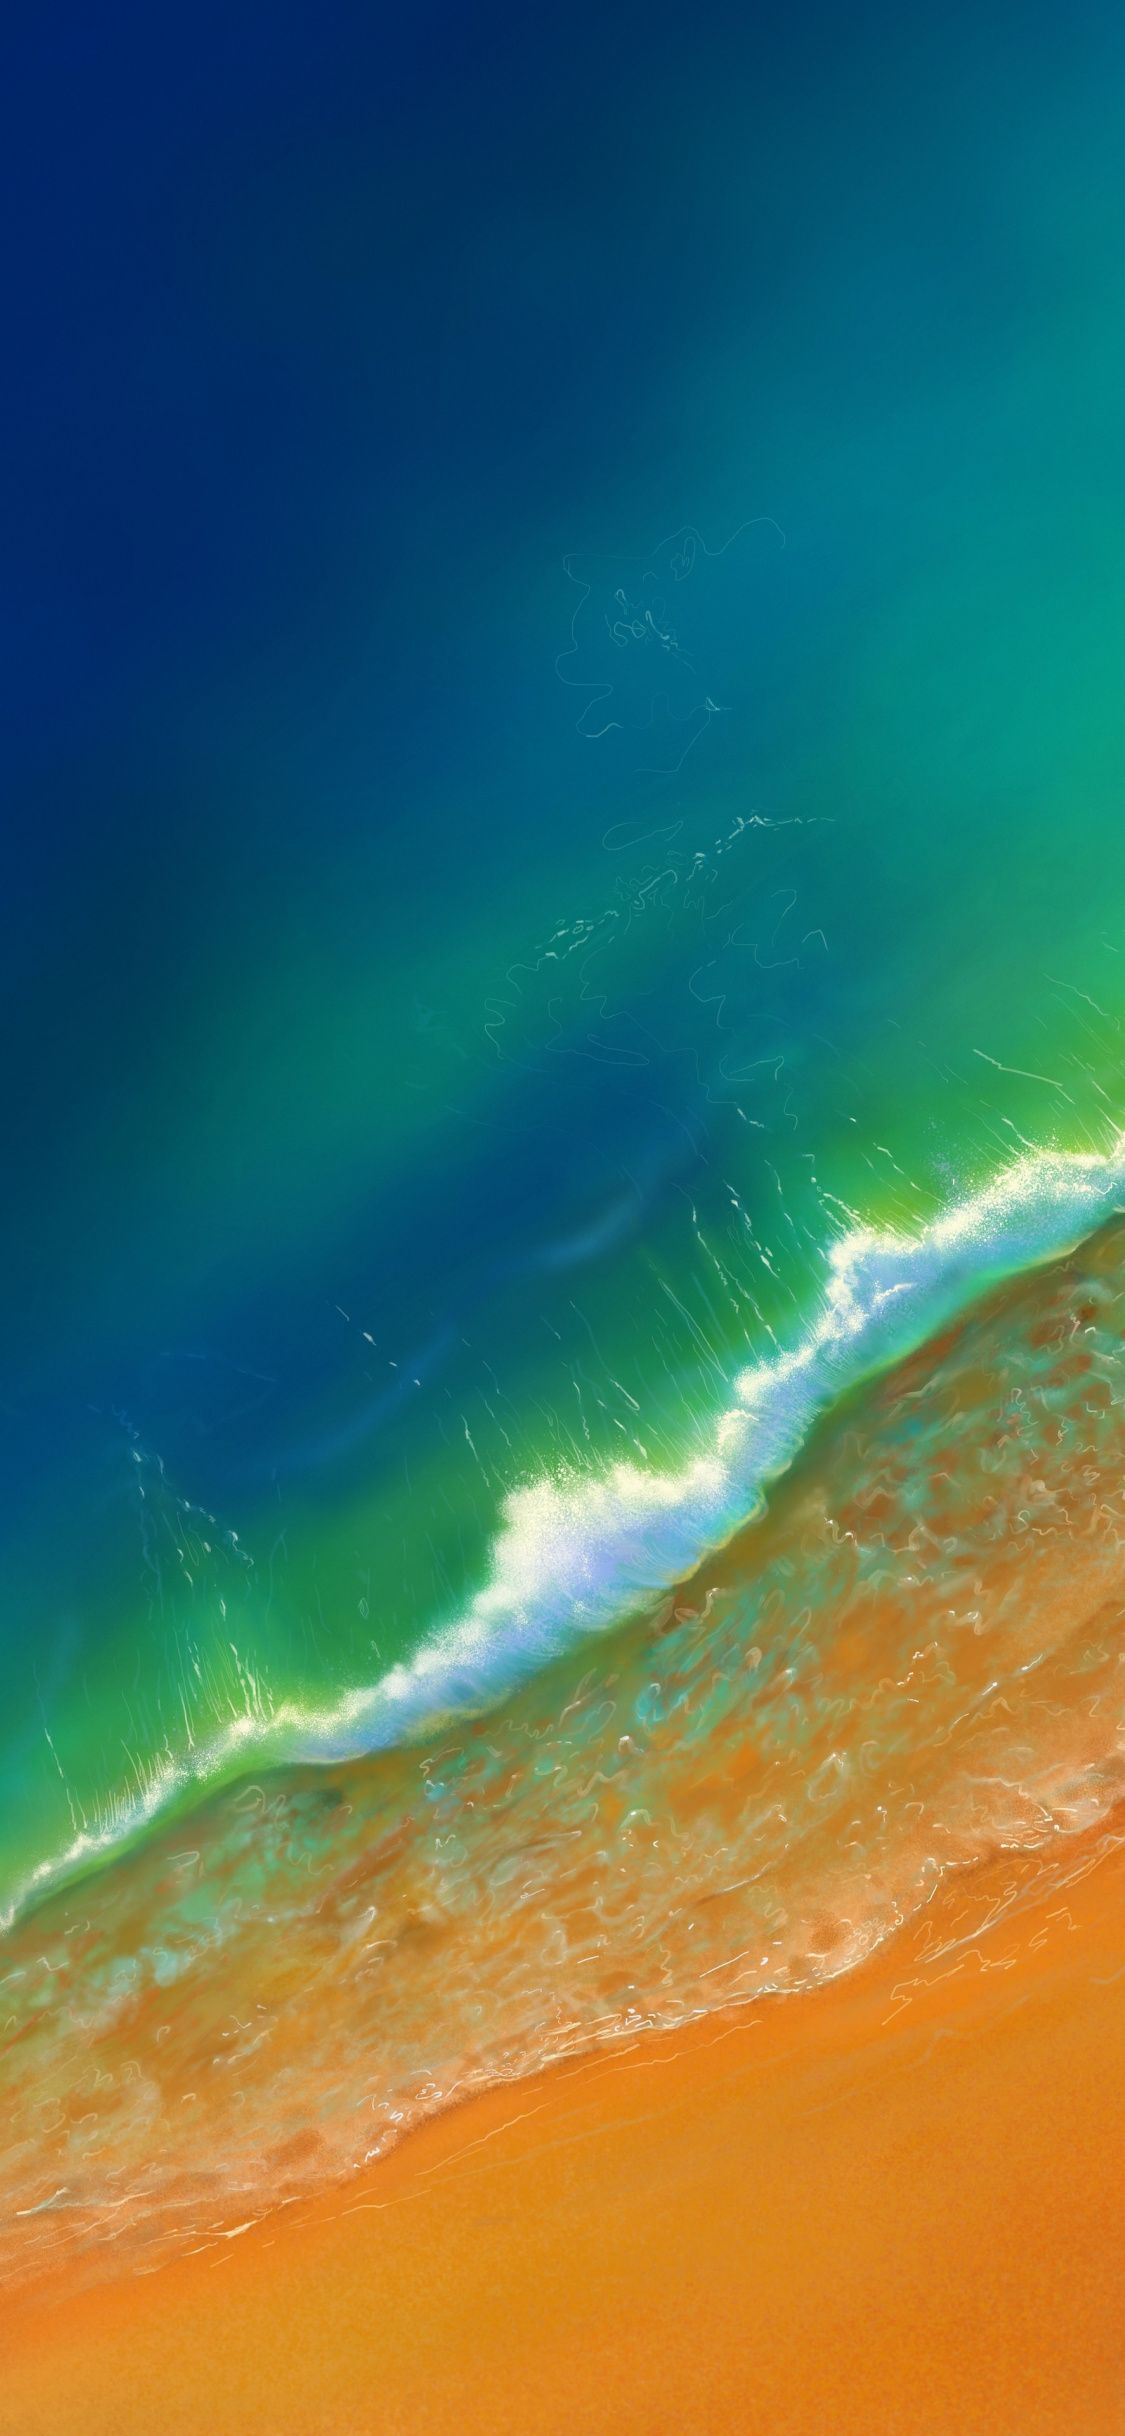 Download 1152x864 wallpaper Green ocean, sea waves, aerial view, beach, iPhone X 1125x2436 HD image, background, 20164. Ocean wallpaper, Green ocean, Sea waves